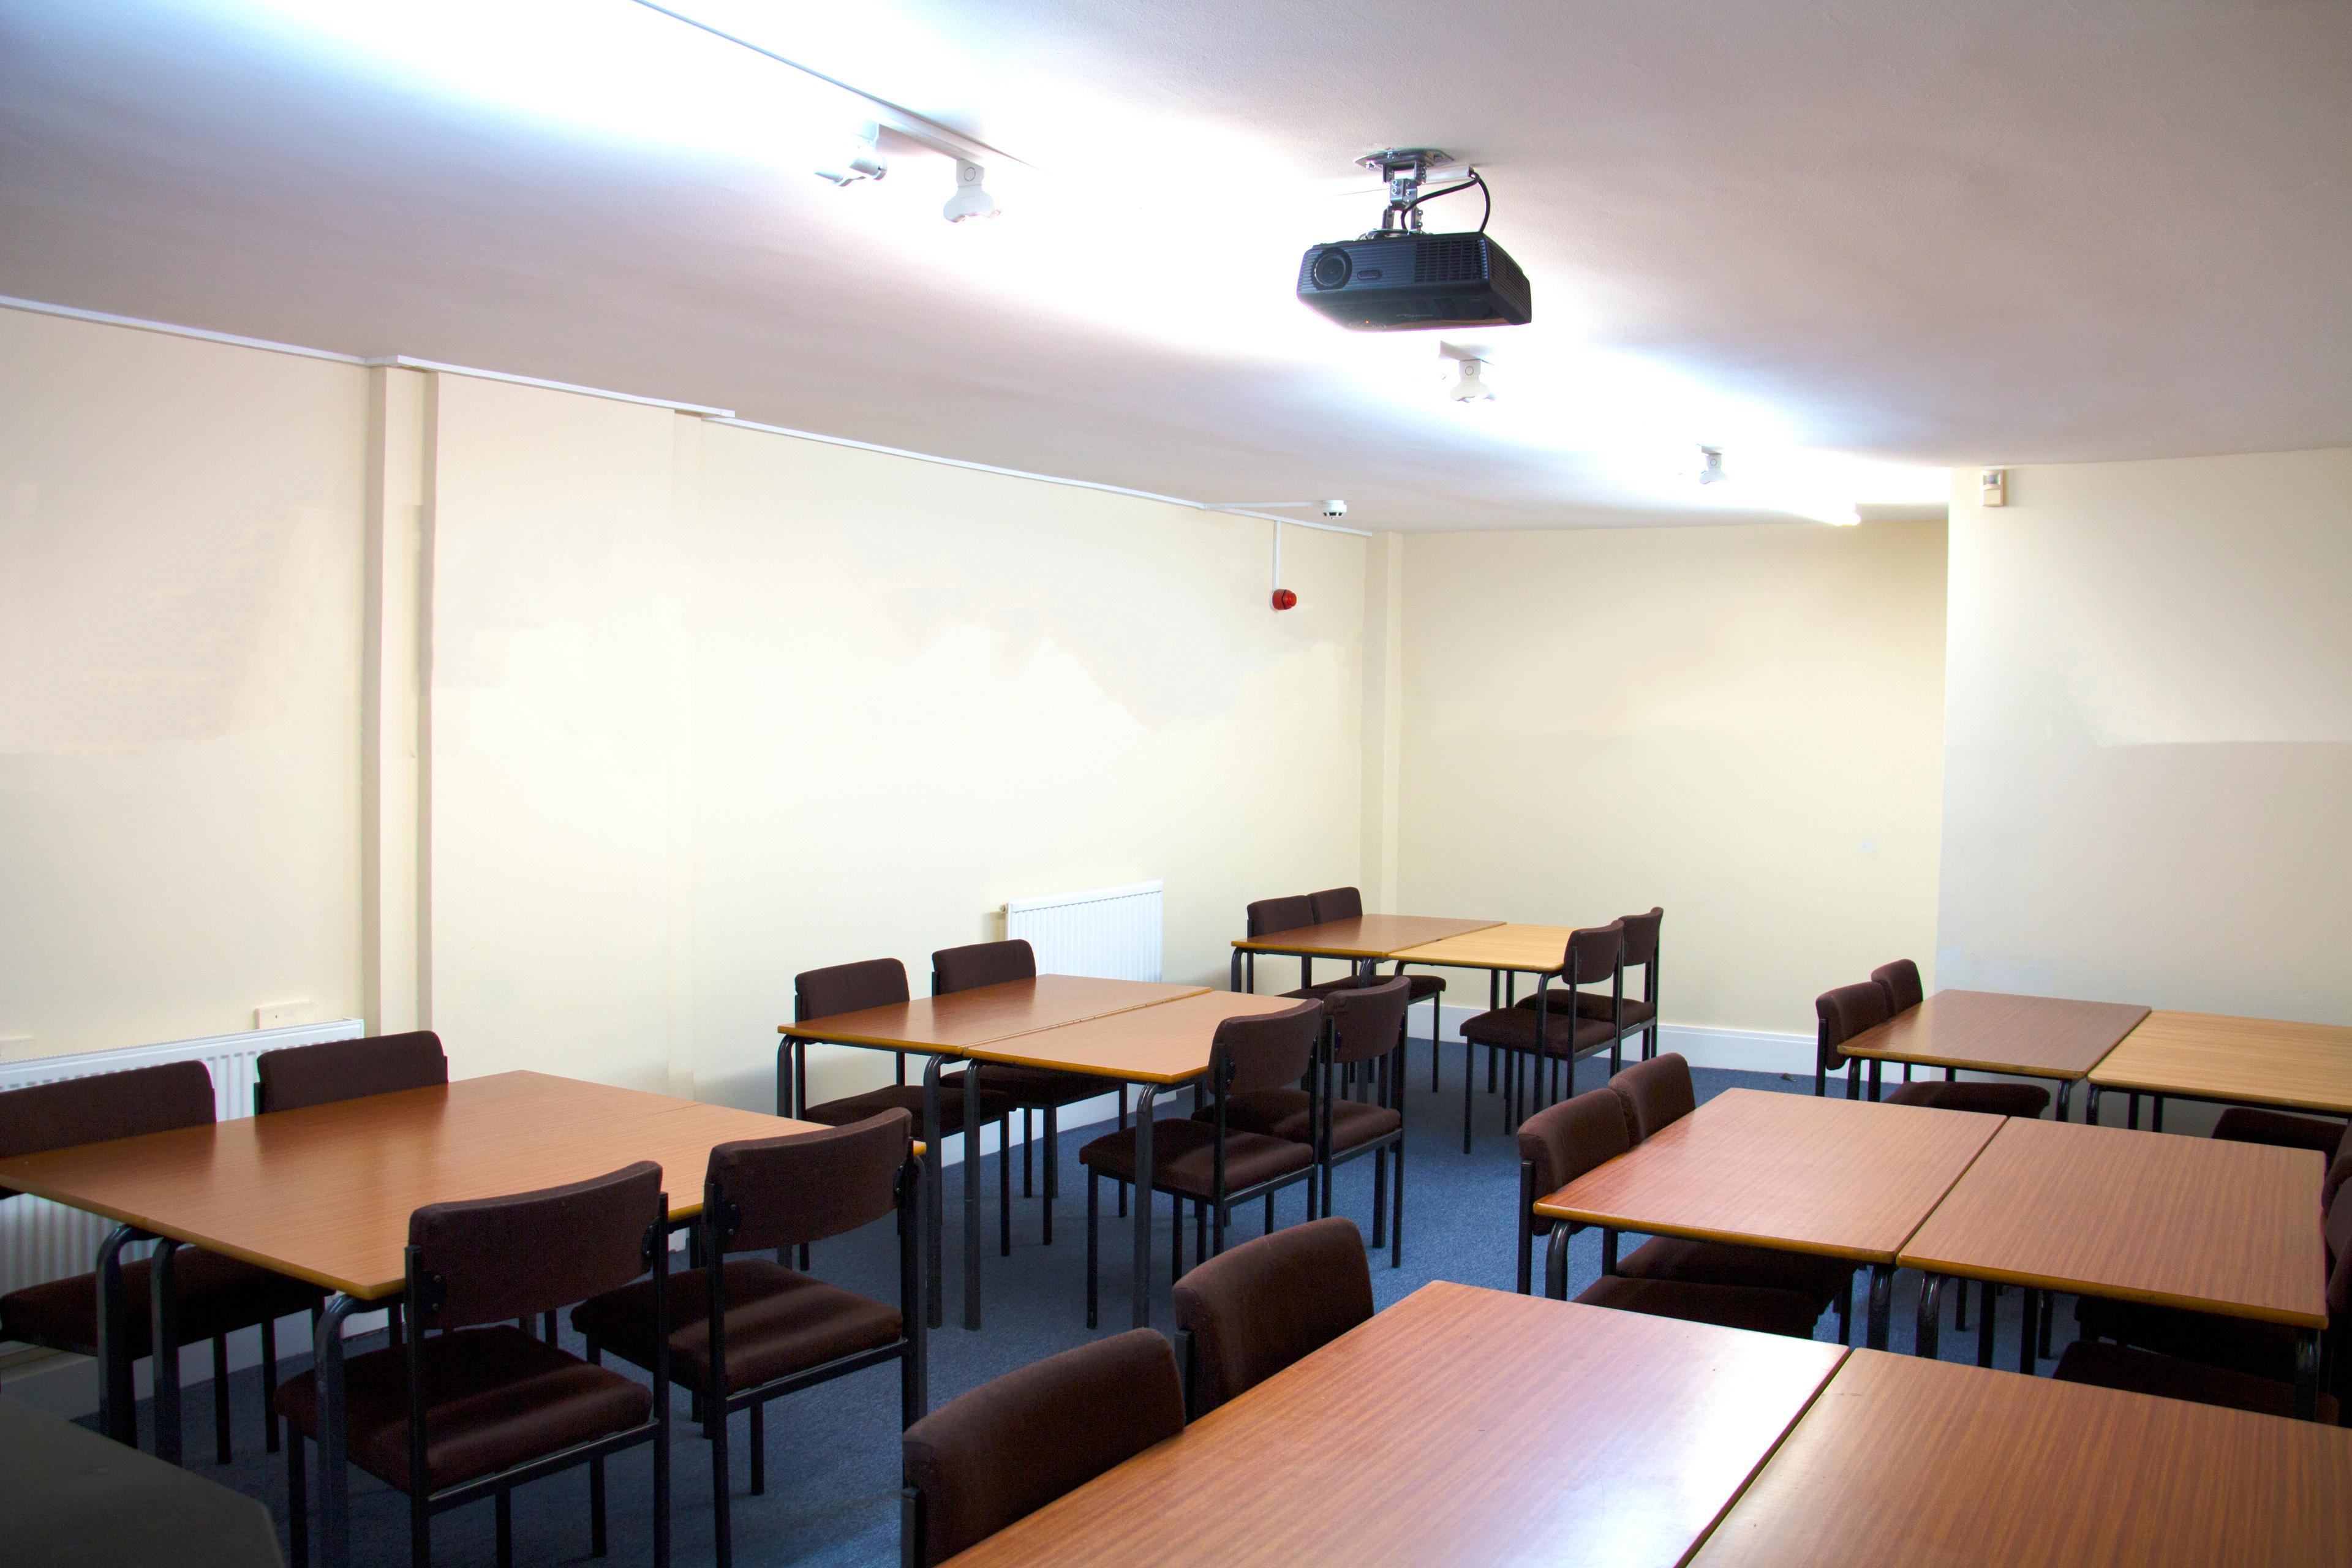 Meeting Room / Classroom 106, My Meeting Space - North London College photo #2